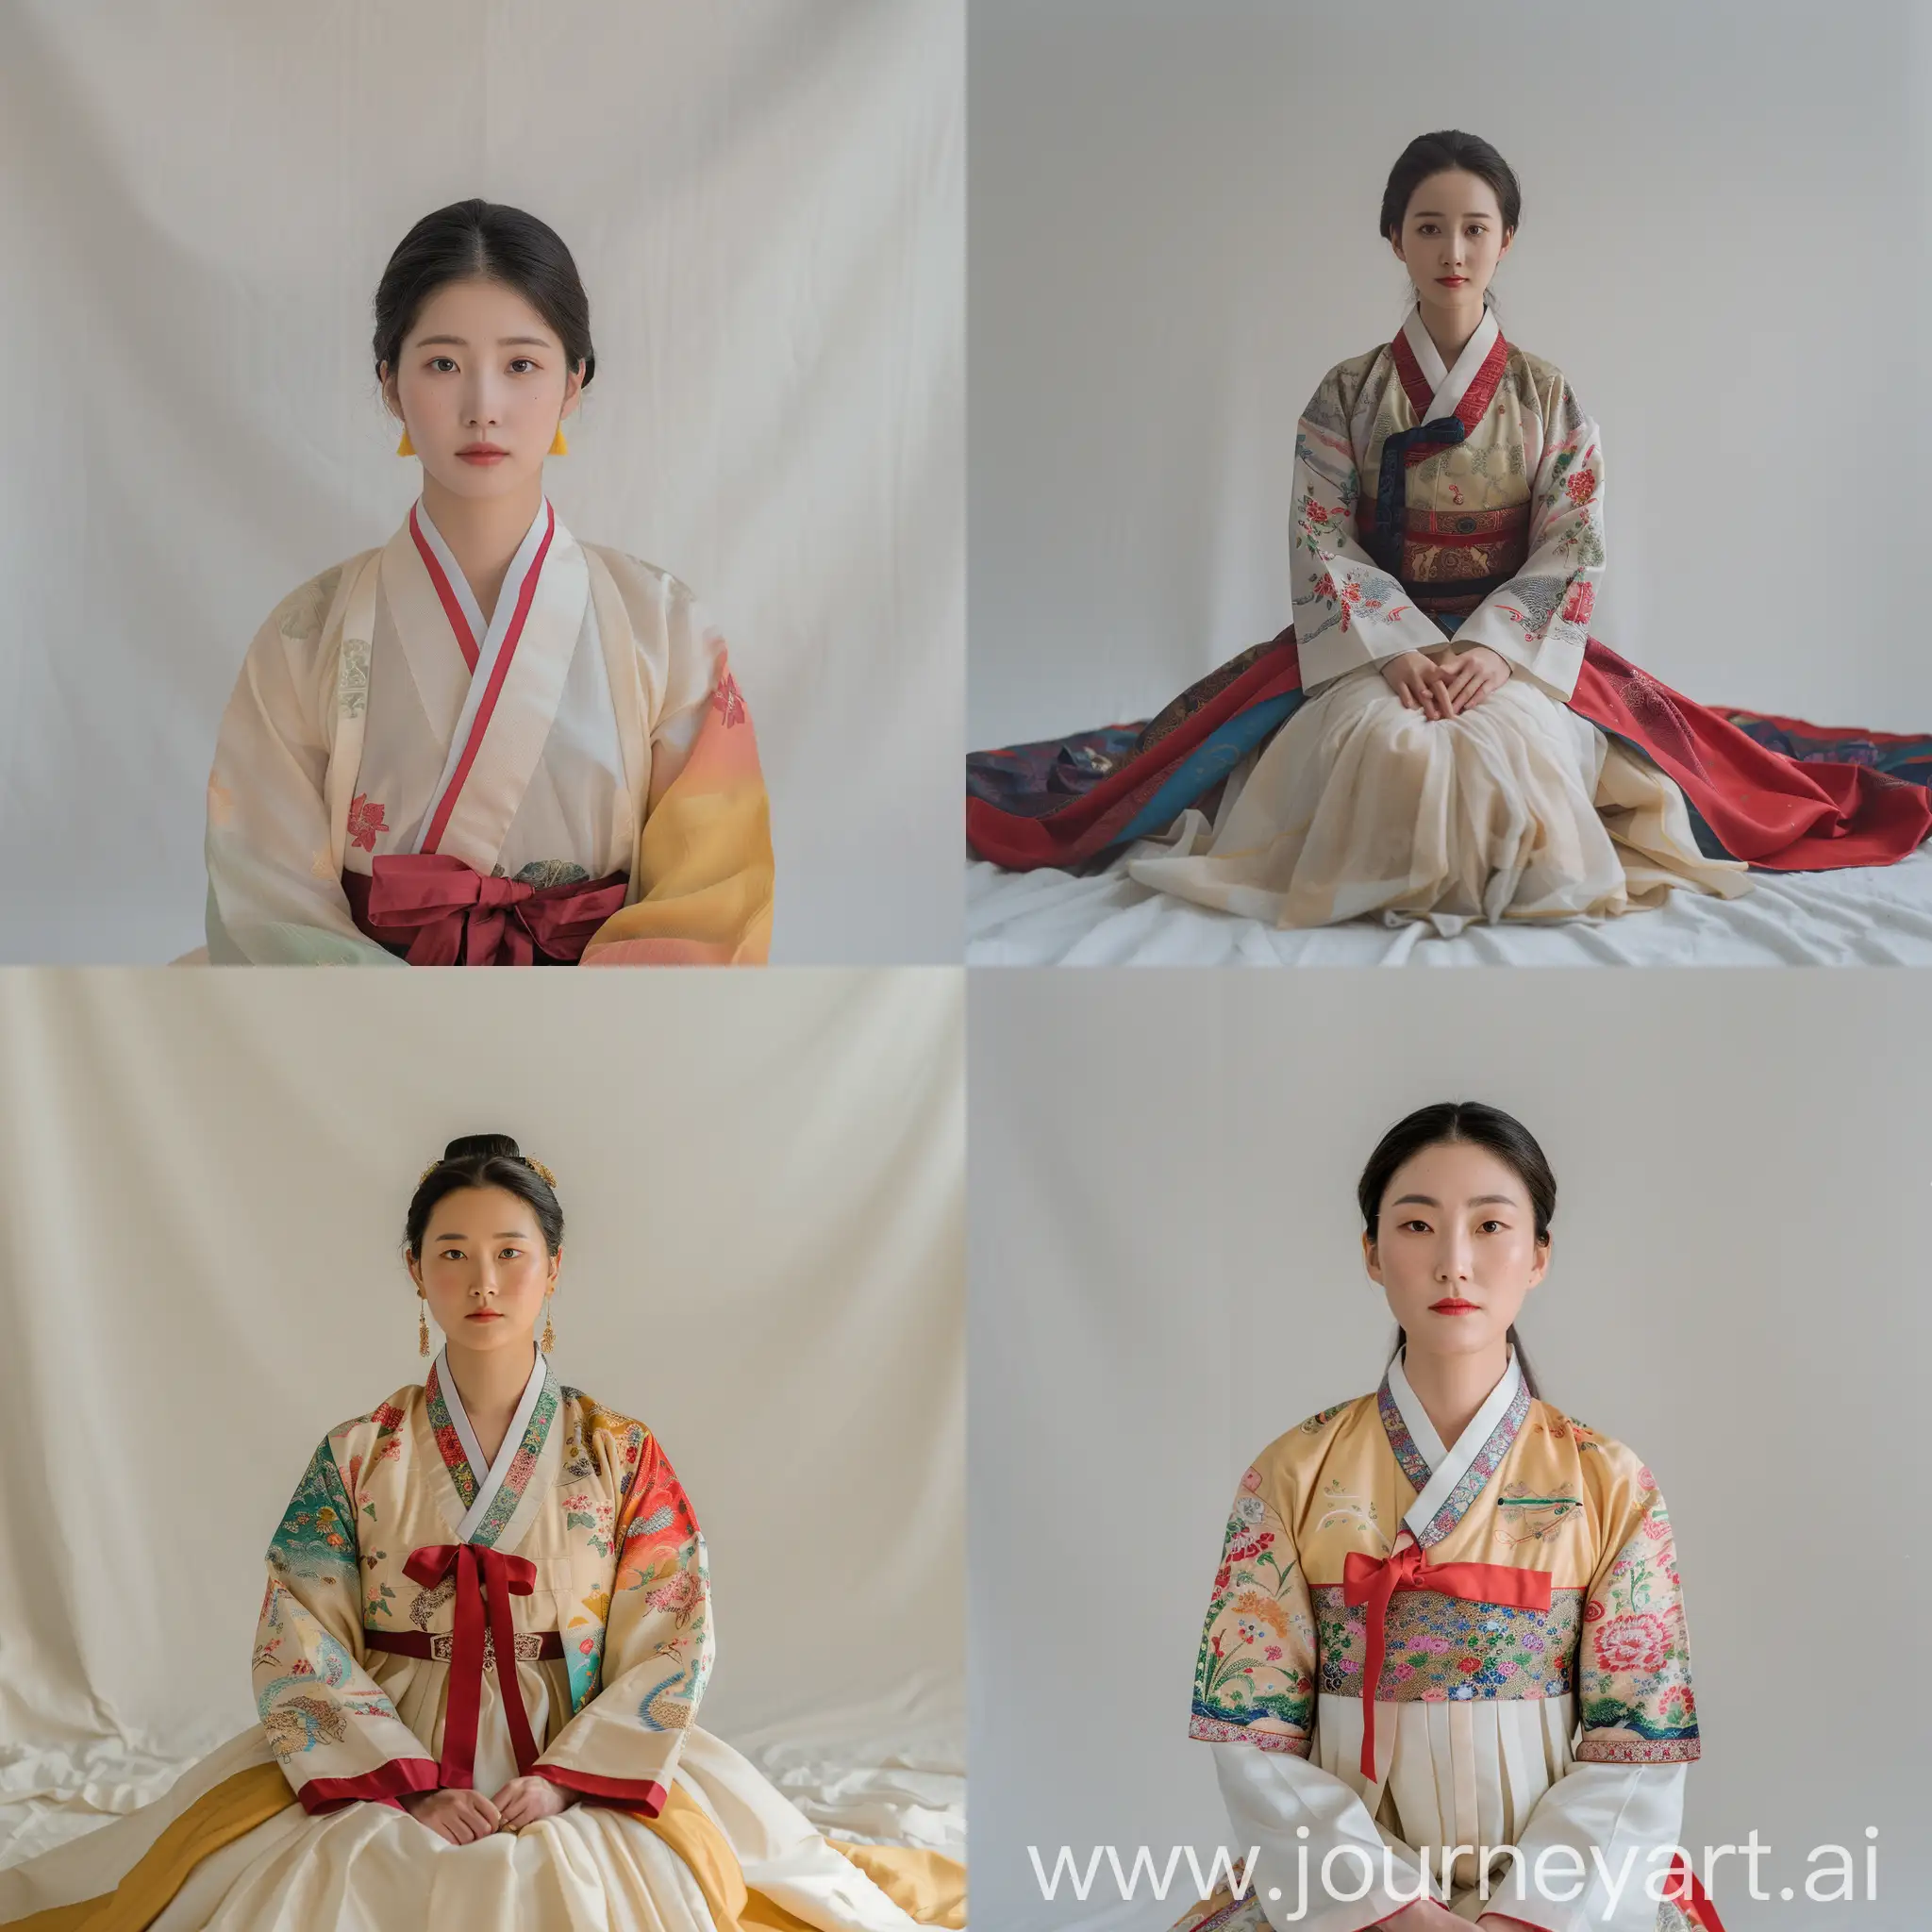 Asian female, centered, full body, studio shot, Foreground crisp, Subject Focus intense, camera locked on her, Attire traditional hanbok, vivid colors, Environment minimalist, Environment Focus blurred, Camera on model, Backdrop plain white, Emotion pride, grace, Lighting natural, slight shadow to the side, Time of Day indoor lighting mimics morning, Textures rich fabric, smooth backdrop, Image Type sharp, vibrant, Film stock high-definition digital, capturing cultural beauty.